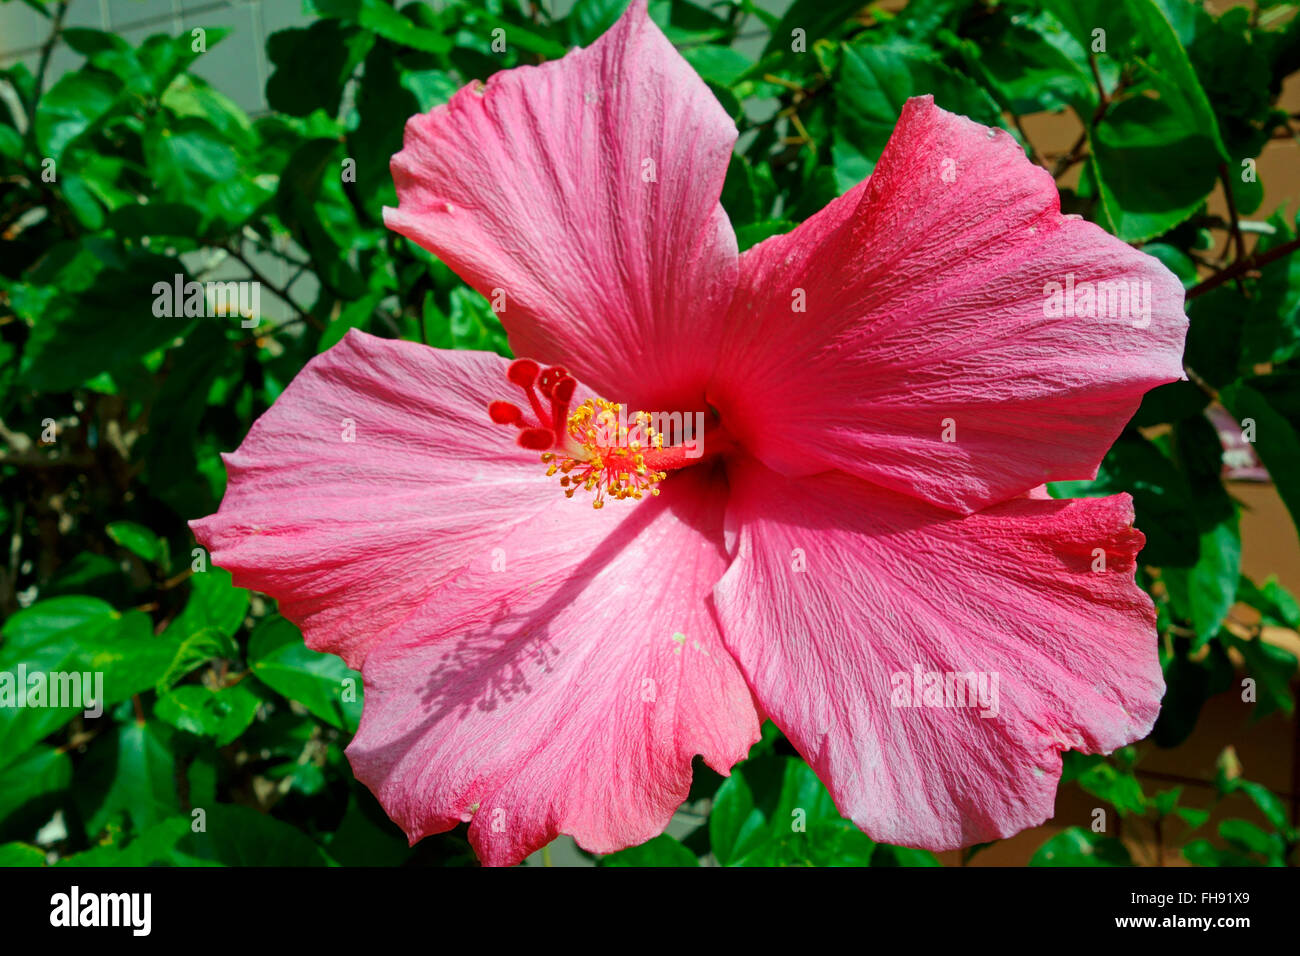 A Hibiscus flower or rose mallow Stock Photo